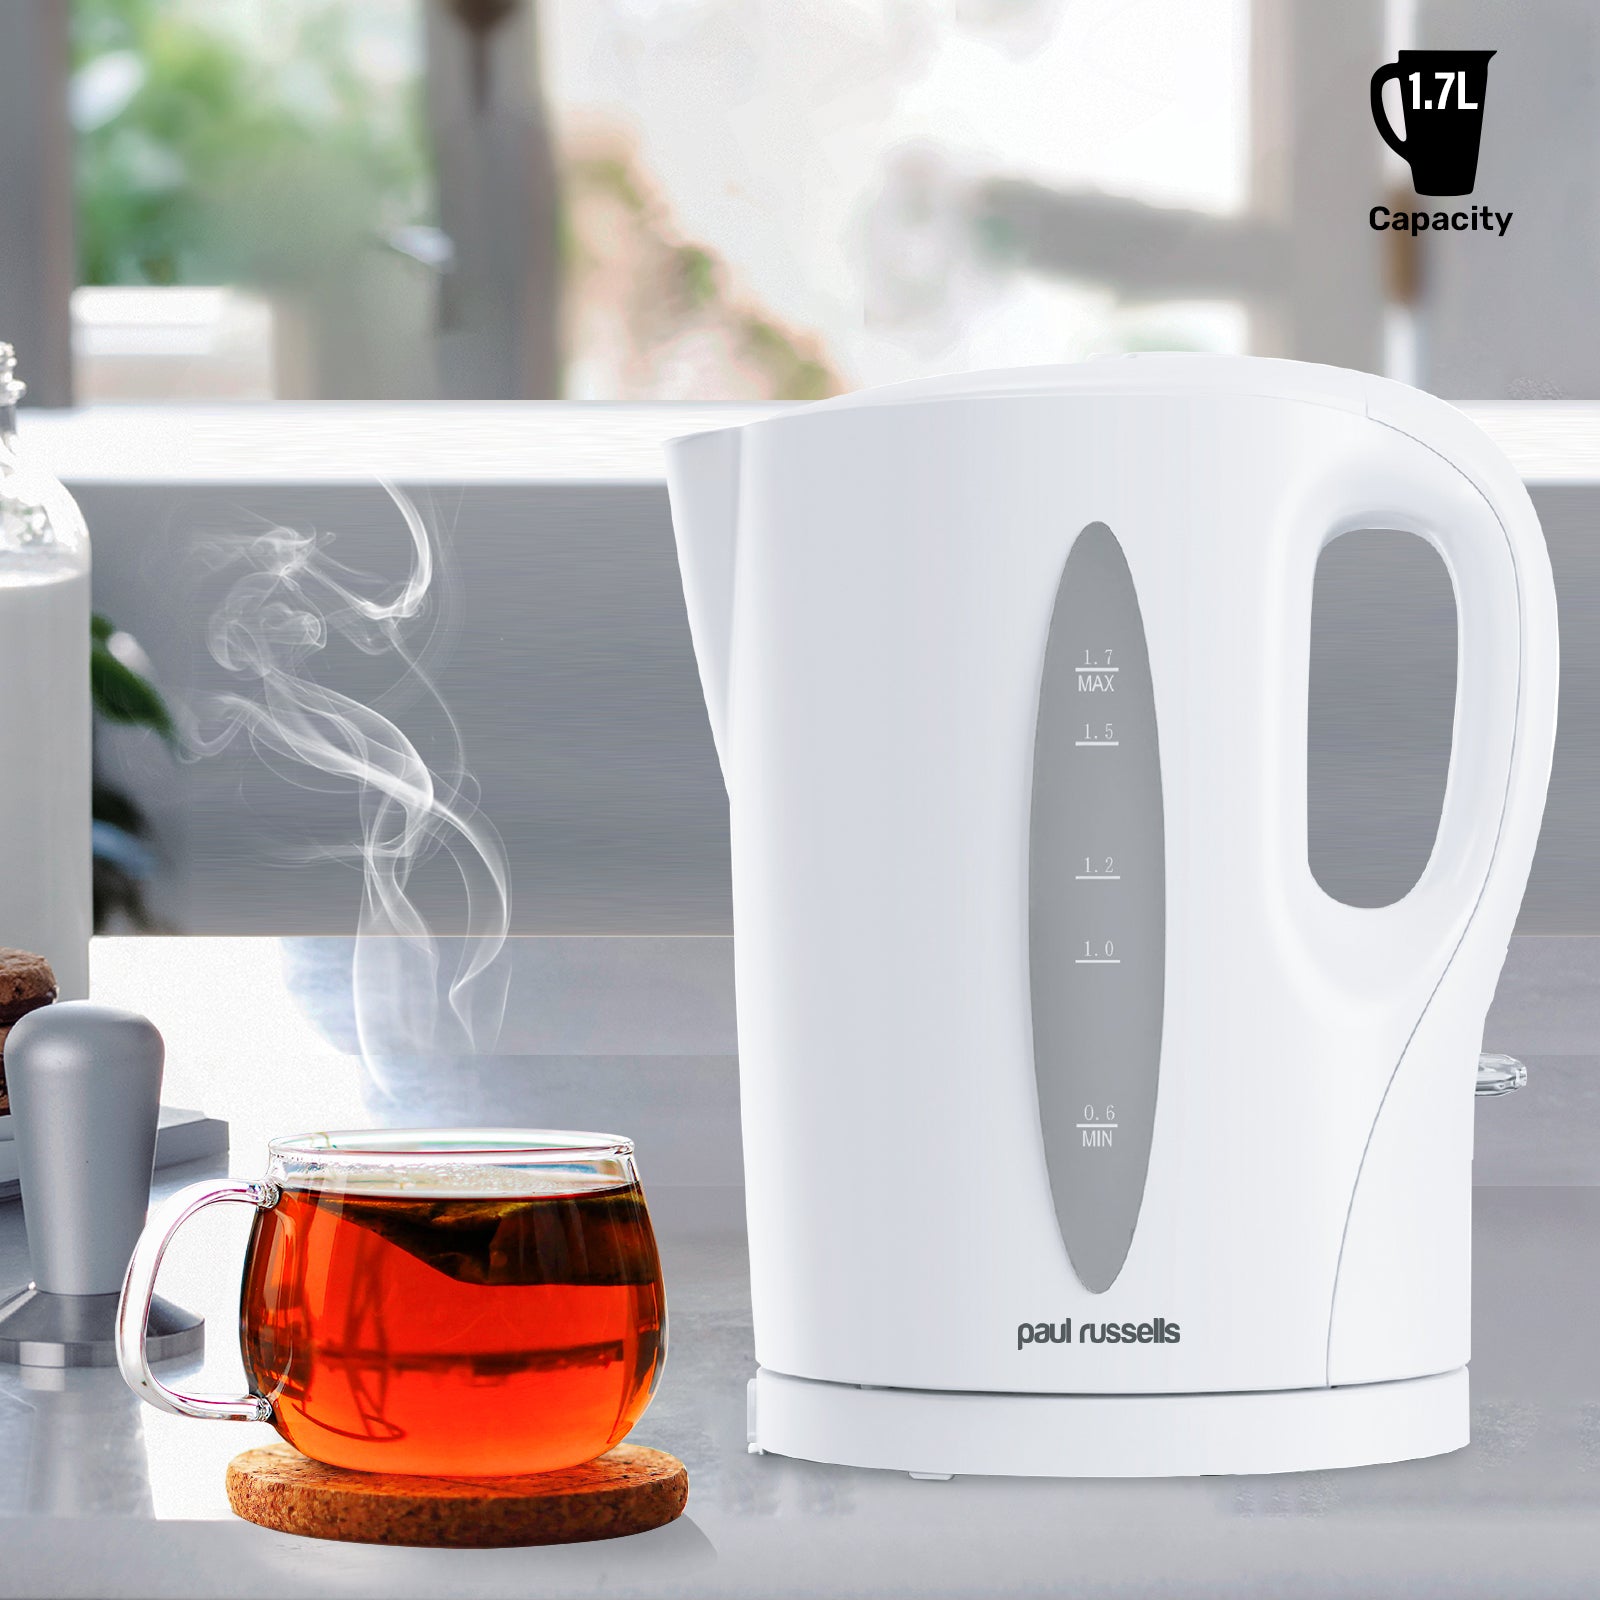 Paul Russells White Plastic Kettle - 1.7L Capacity, Perfect for 7 Cups, Family Size, Clear Water Window, LED Indicator, 2200w Quite boil, Sleek and Simple, Boil Dry Protection, Cord-free Serving.